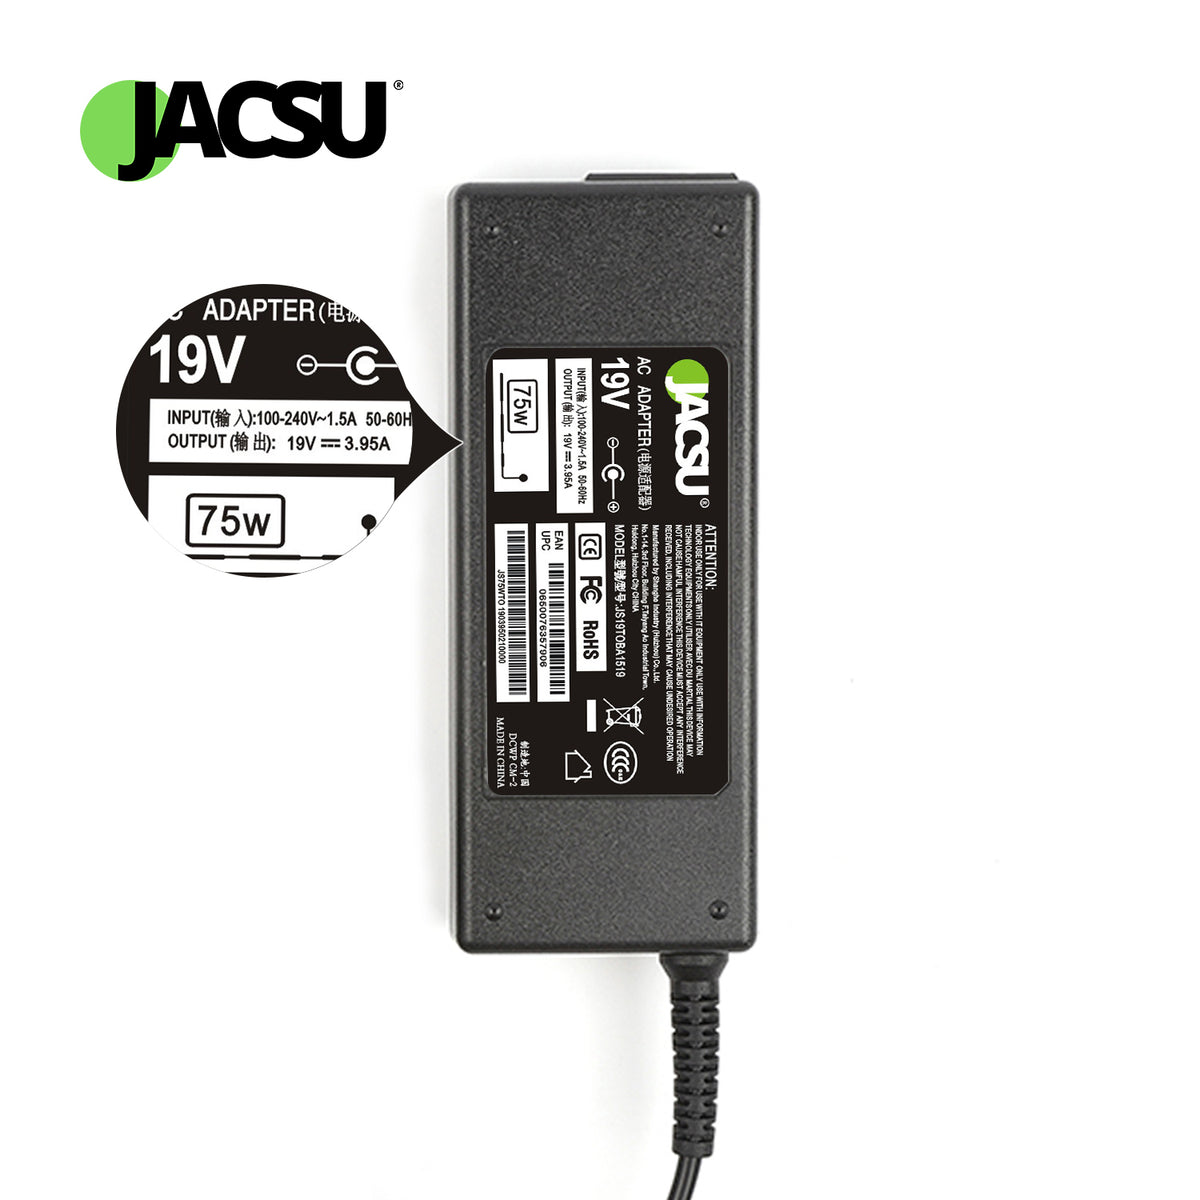 Jacsu 19V 3.95A PIN 5.5X2.5 75 W Laptop Adapter/Charger For Toshiba Mini NB100 Satellite C55DT-A C70D-B By